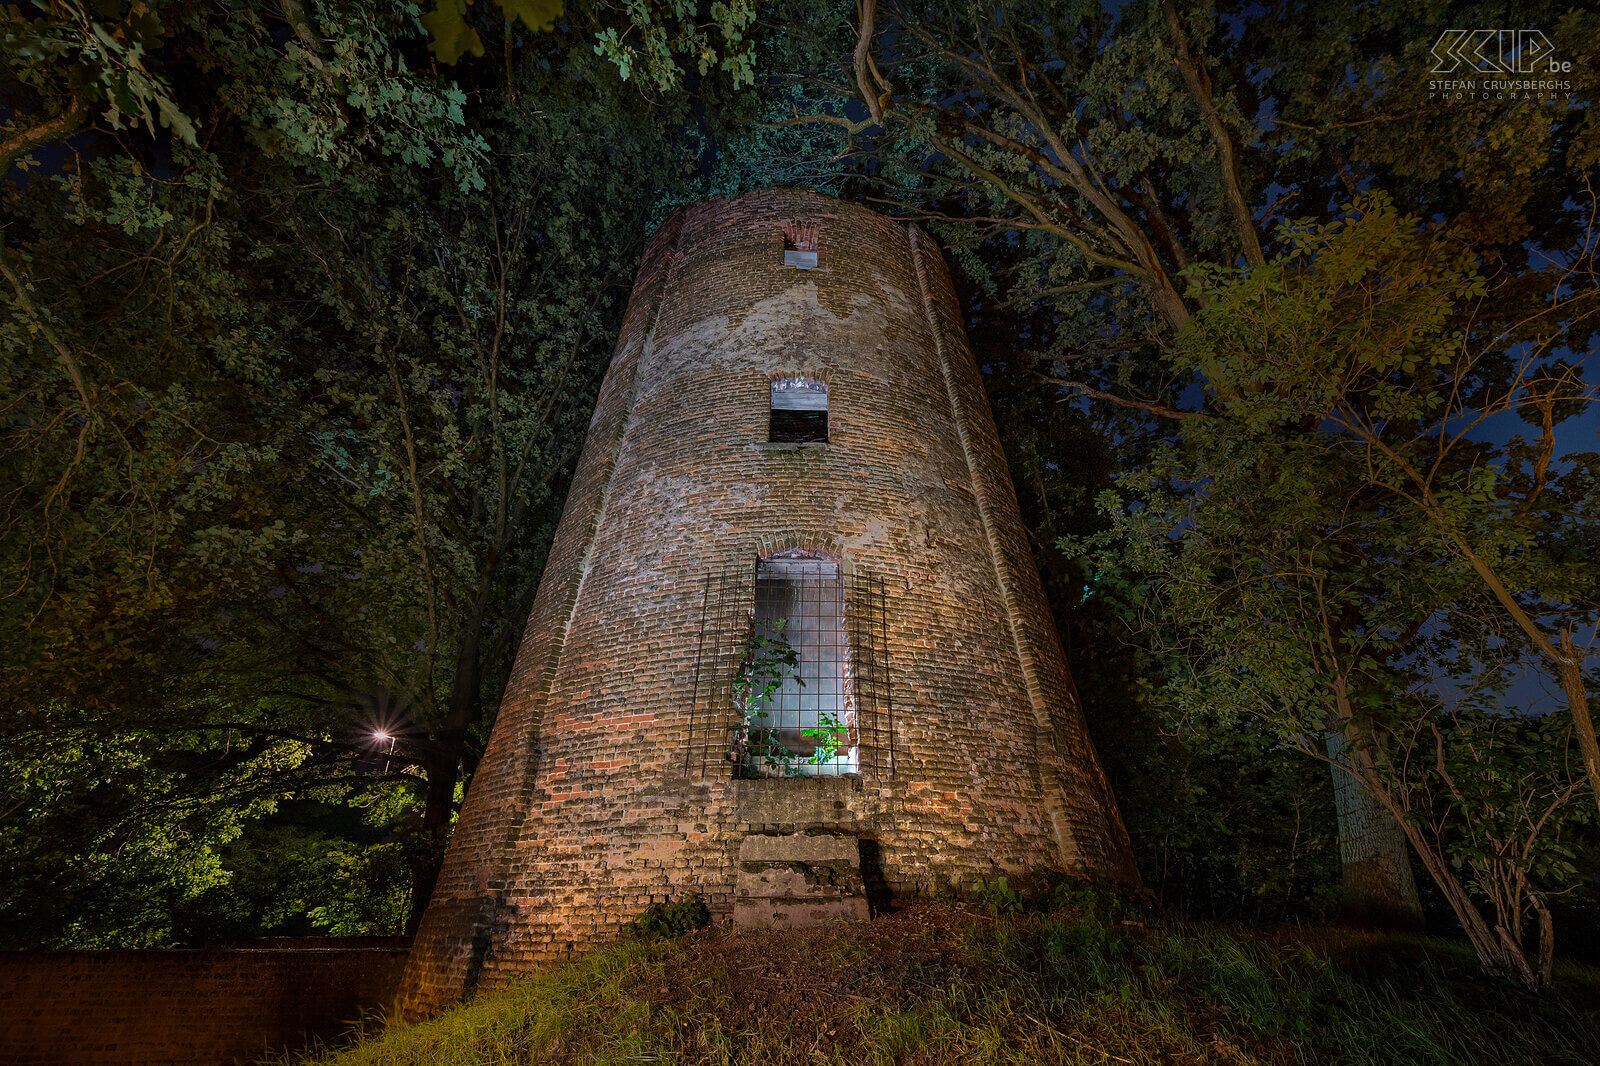 Hageland by night - Mill in Engsbergsen in Tessenderlo The mill in Engsbergsen in Tessenderlo was a grain mill that was built in 1826. The mill has not been in use since 1934 and is now a ruin that stands among the trees in a residential area. The windmill is no longer photogenic at all and yet I tried to make a few atmospheric images of it in the evening with a few flashes and LED lamps. Stefan Cruysberghs